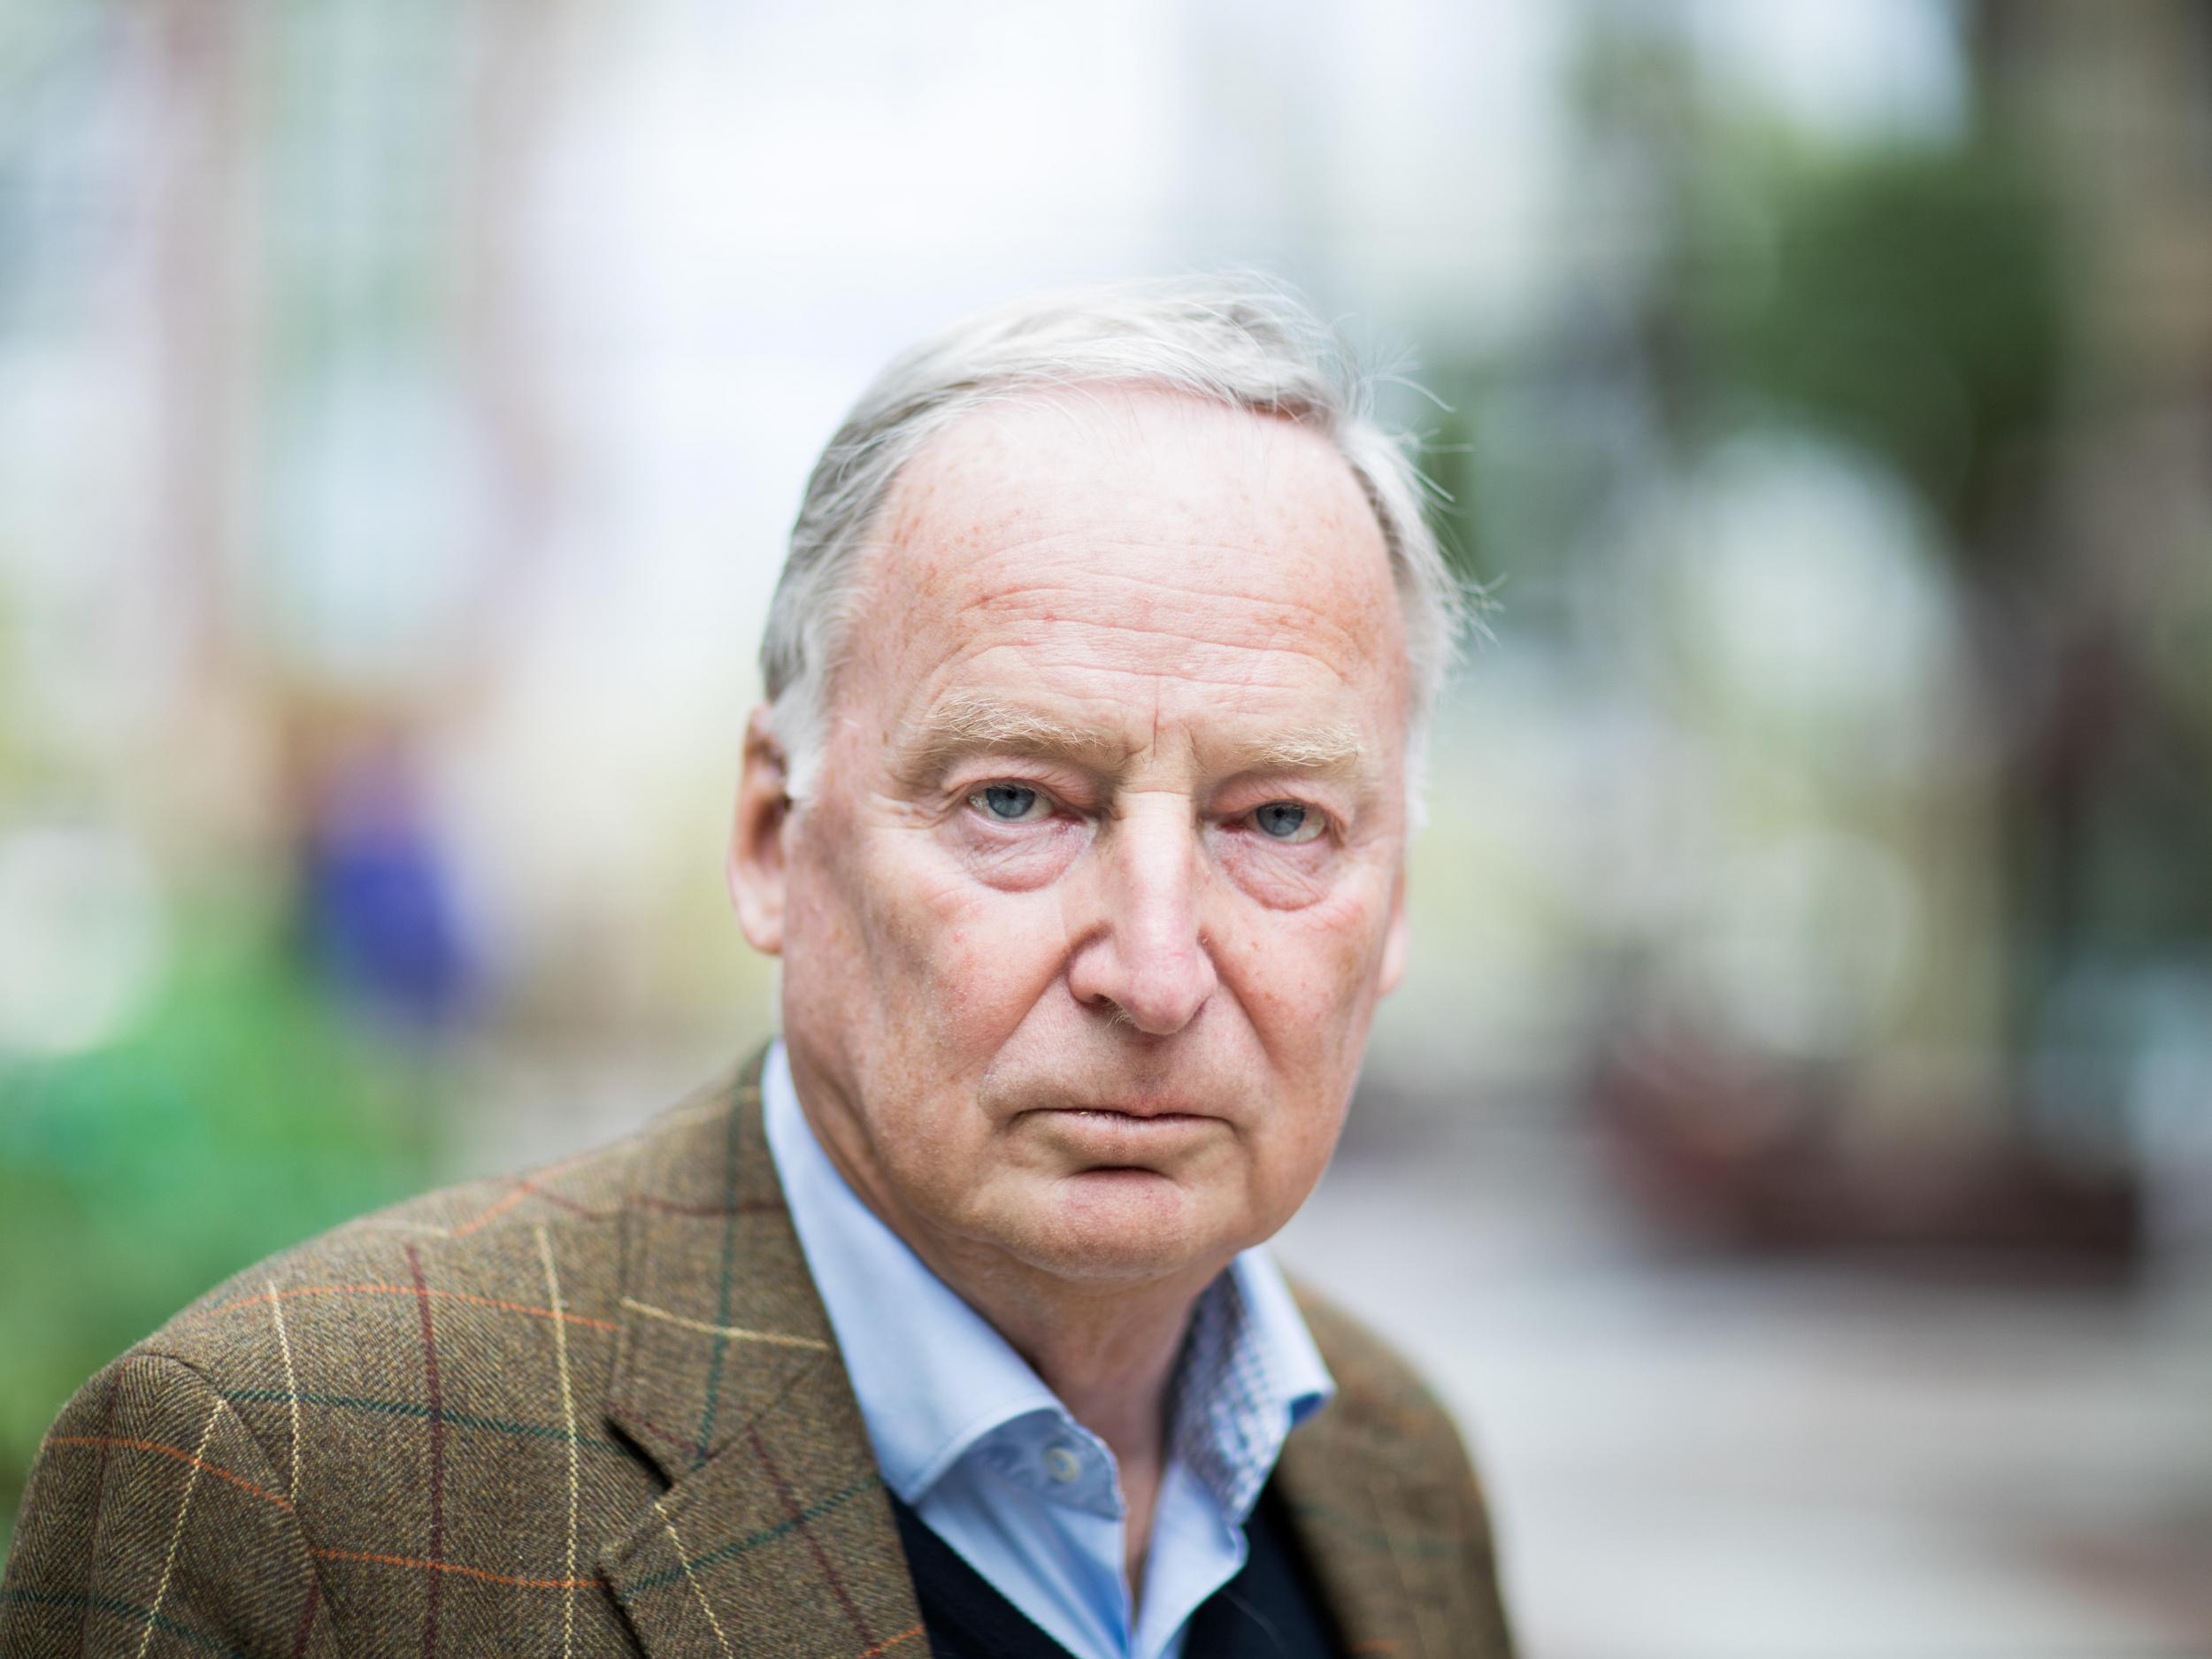 Mr Gauland was criticised by Holocaust survivors’ groups and people hailing from across the political spectrum in Germany 